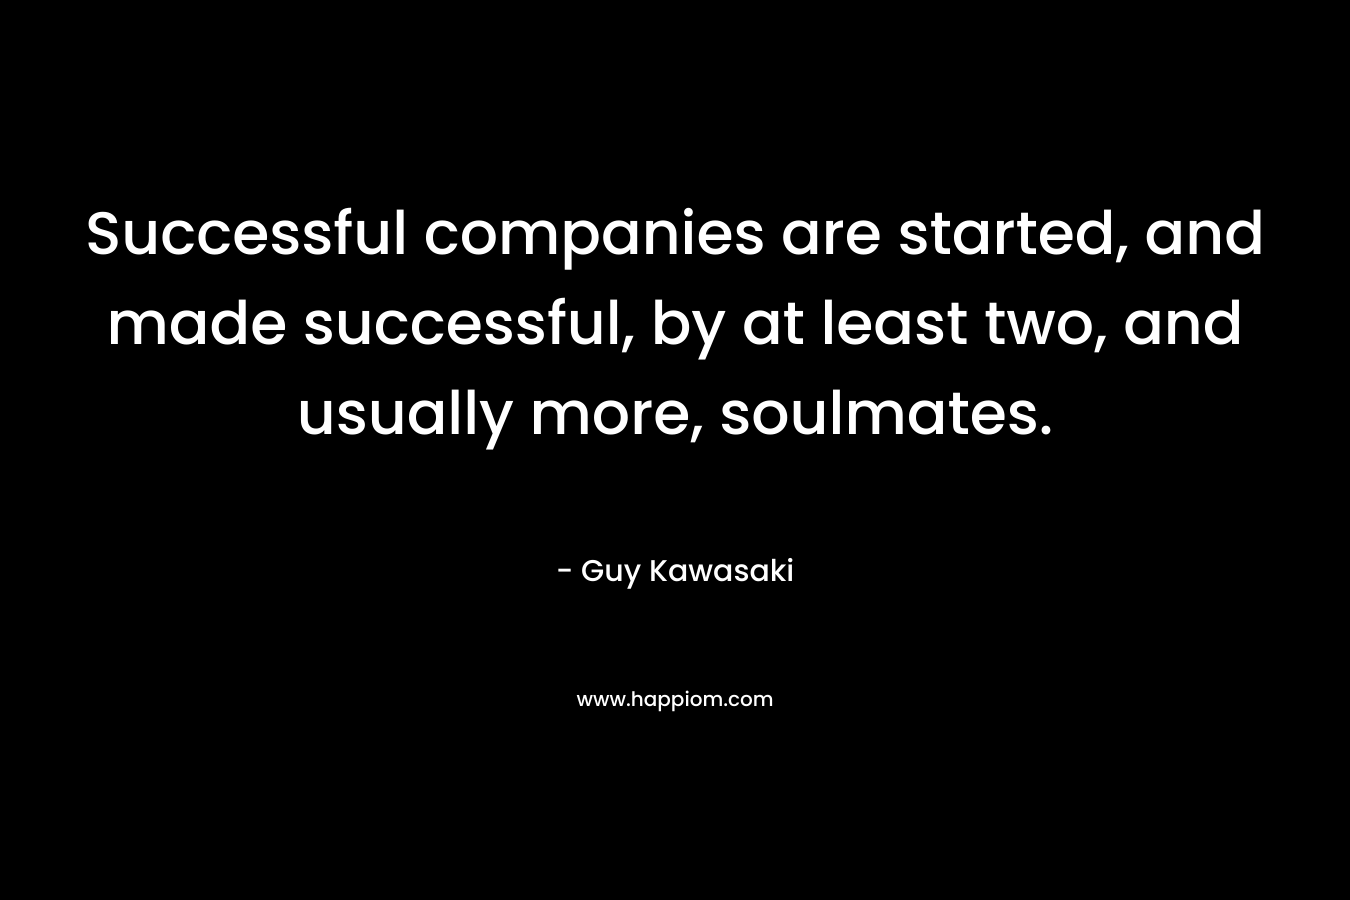 Successful companies are started, and made successful, by at least two, and usually more, soulmates.